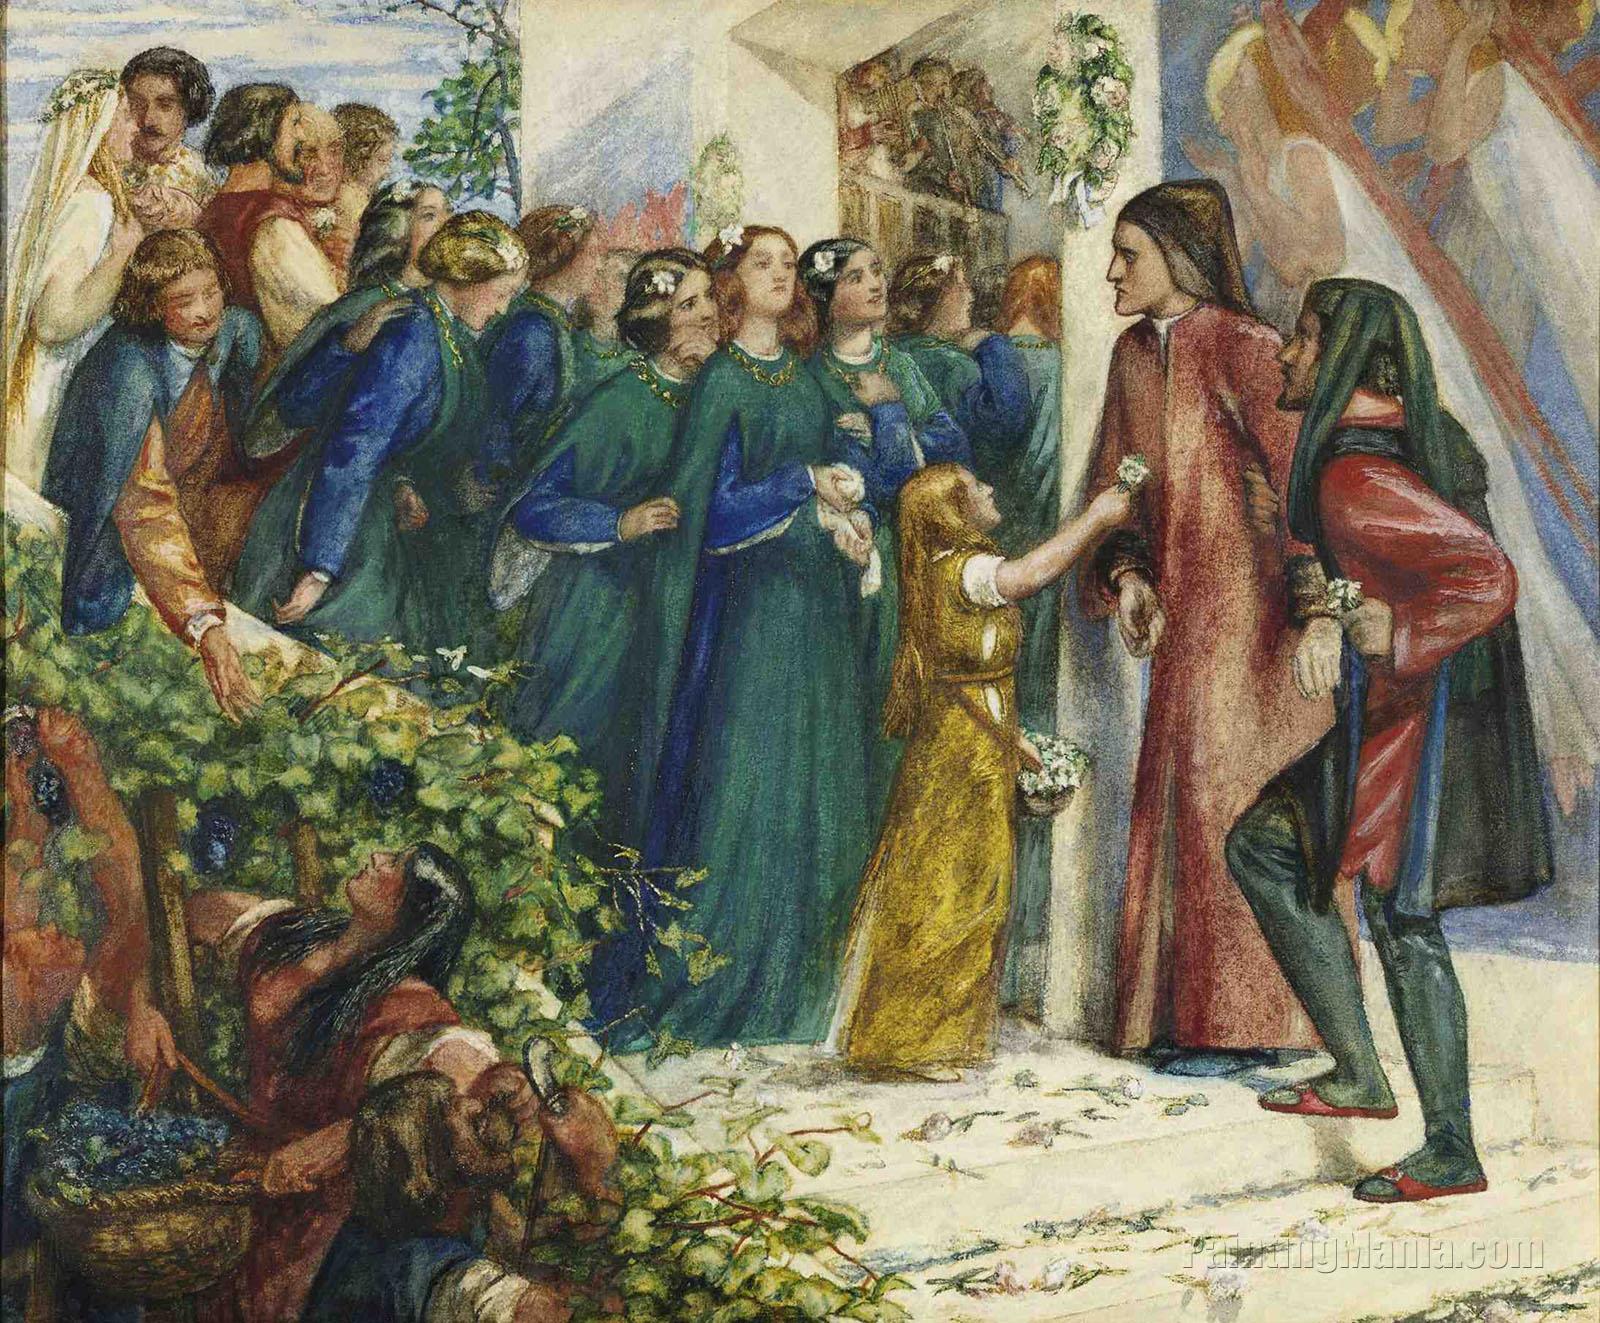 Beatrice Meeting Dante at a Marriage Feast, Denies him her Salutation